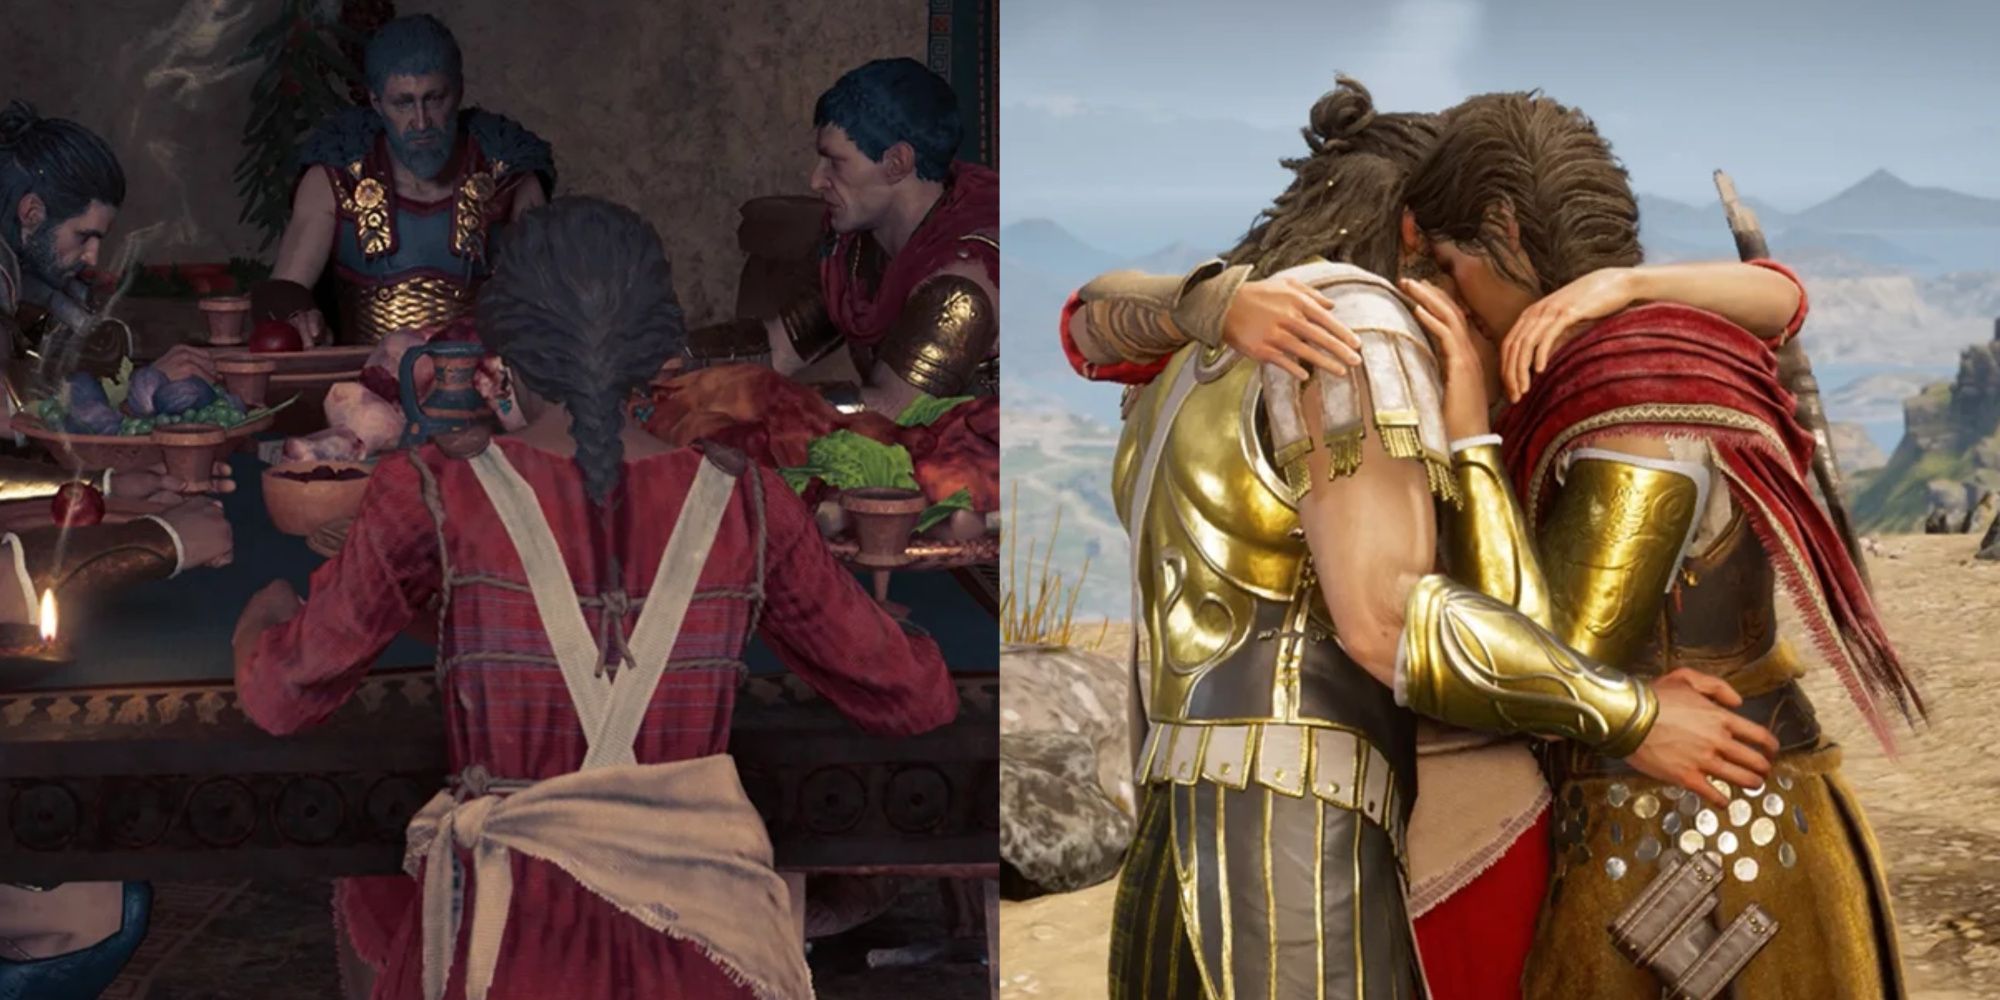 A collage showing the family having dinner on the left, and three characters hugging each other on the right.